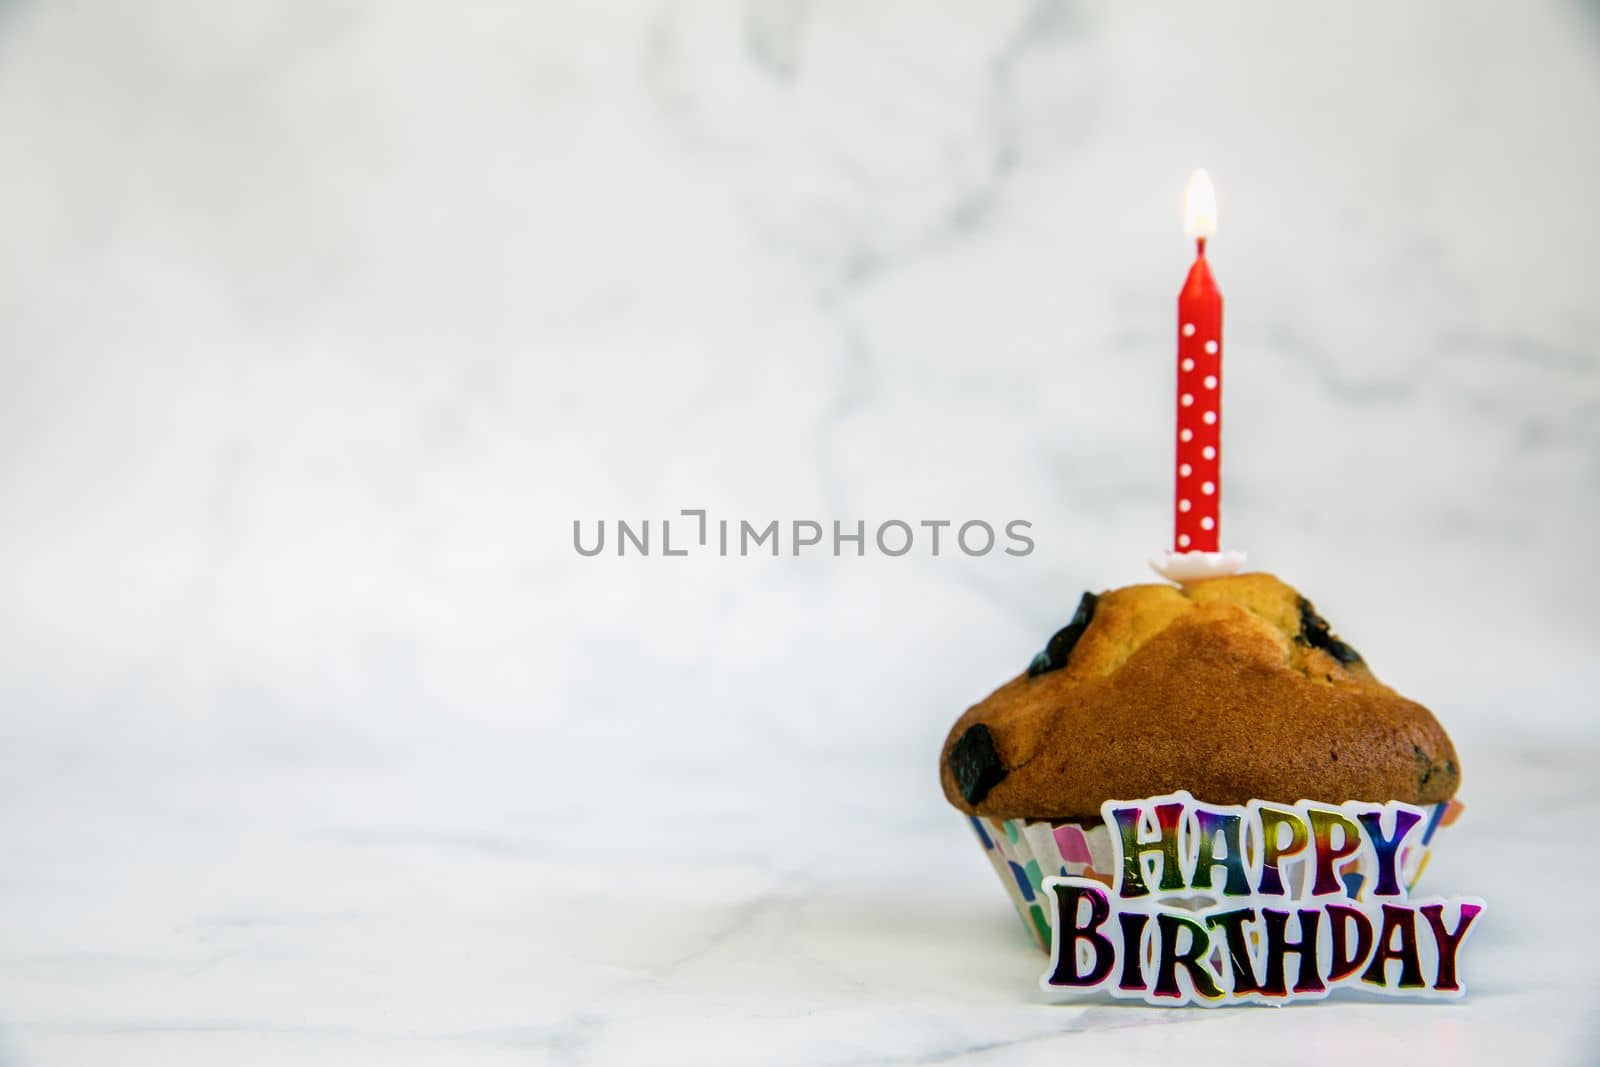 Birthday cupcake with and one red birthday cake candle on a white background with copyspace to side, Happy Birthday, party concept close up